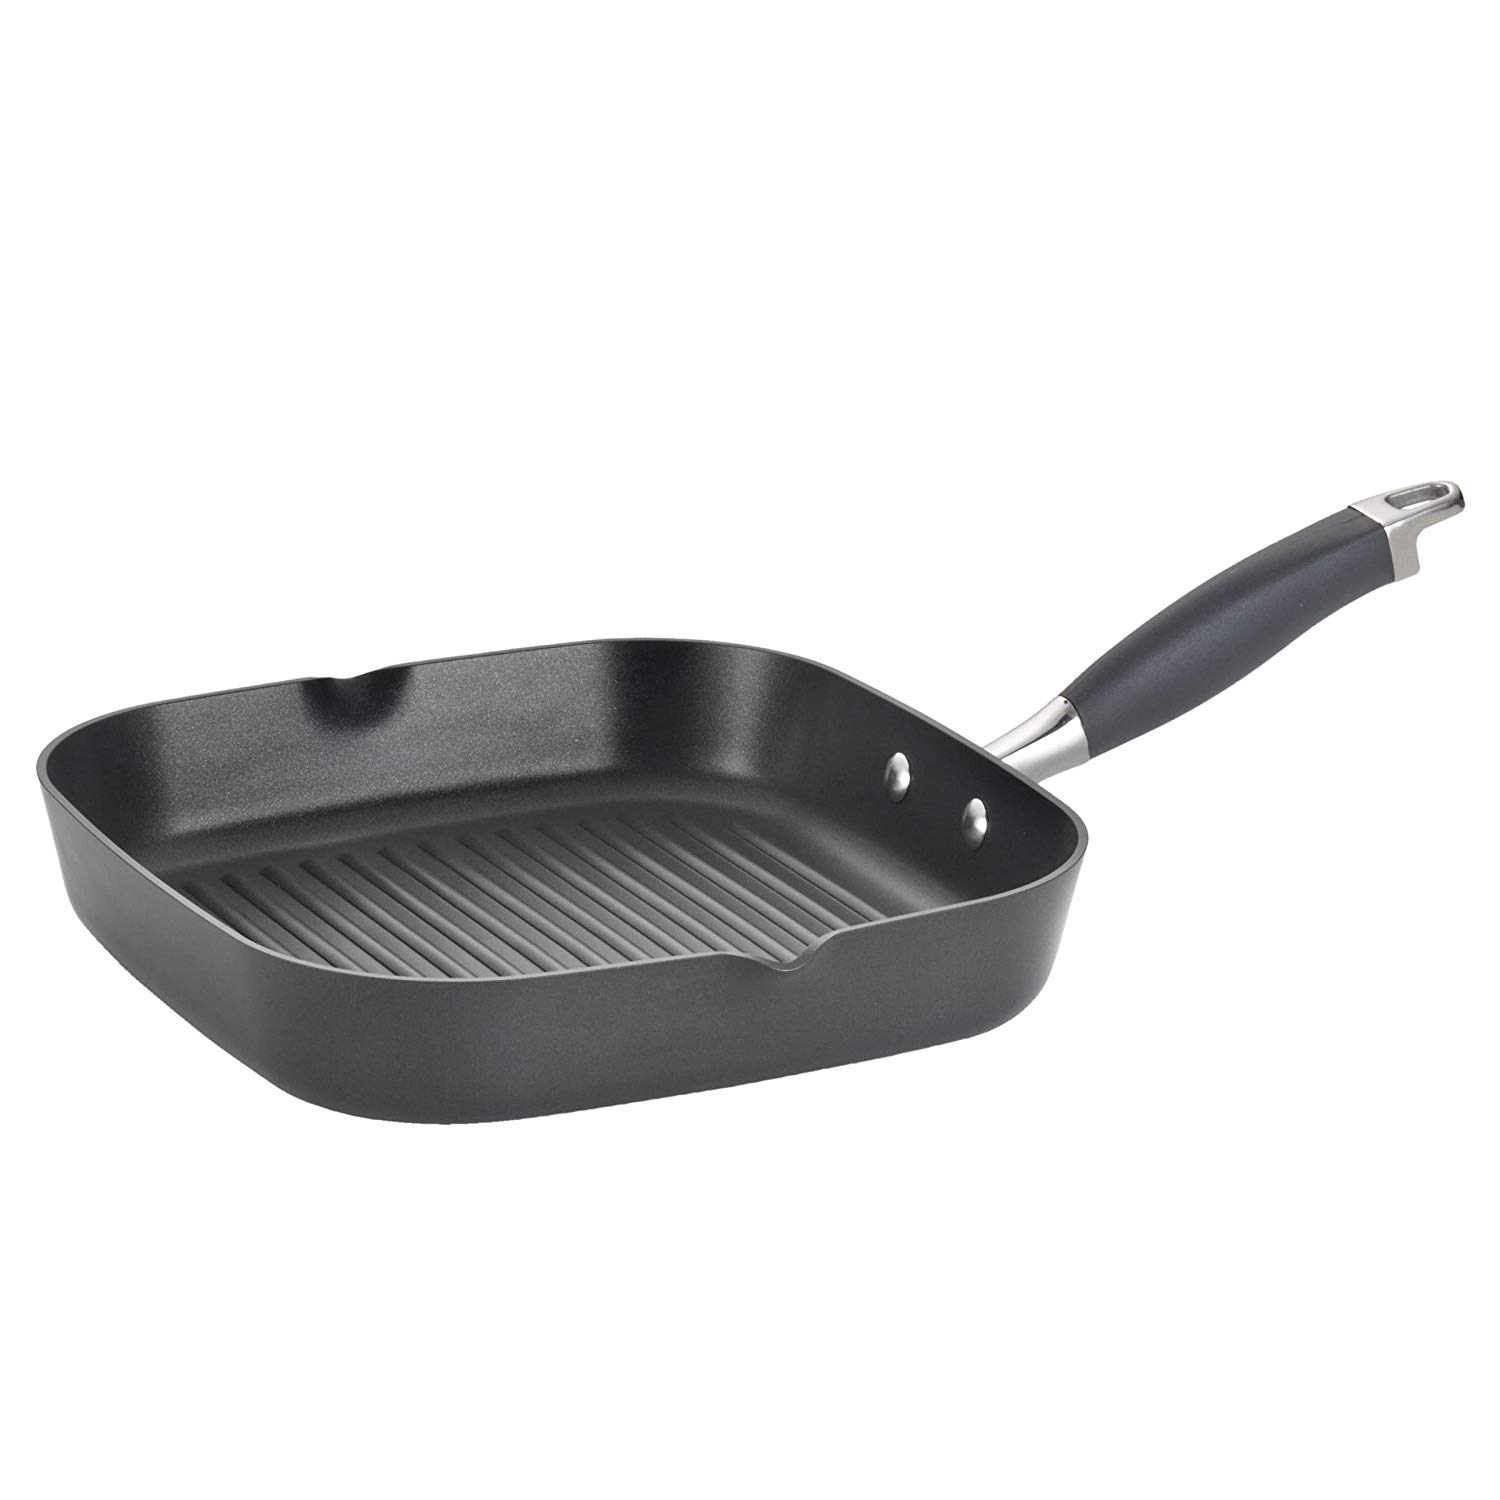 Anolon Stovetop Nonstick Grill Pan, 11-Inch